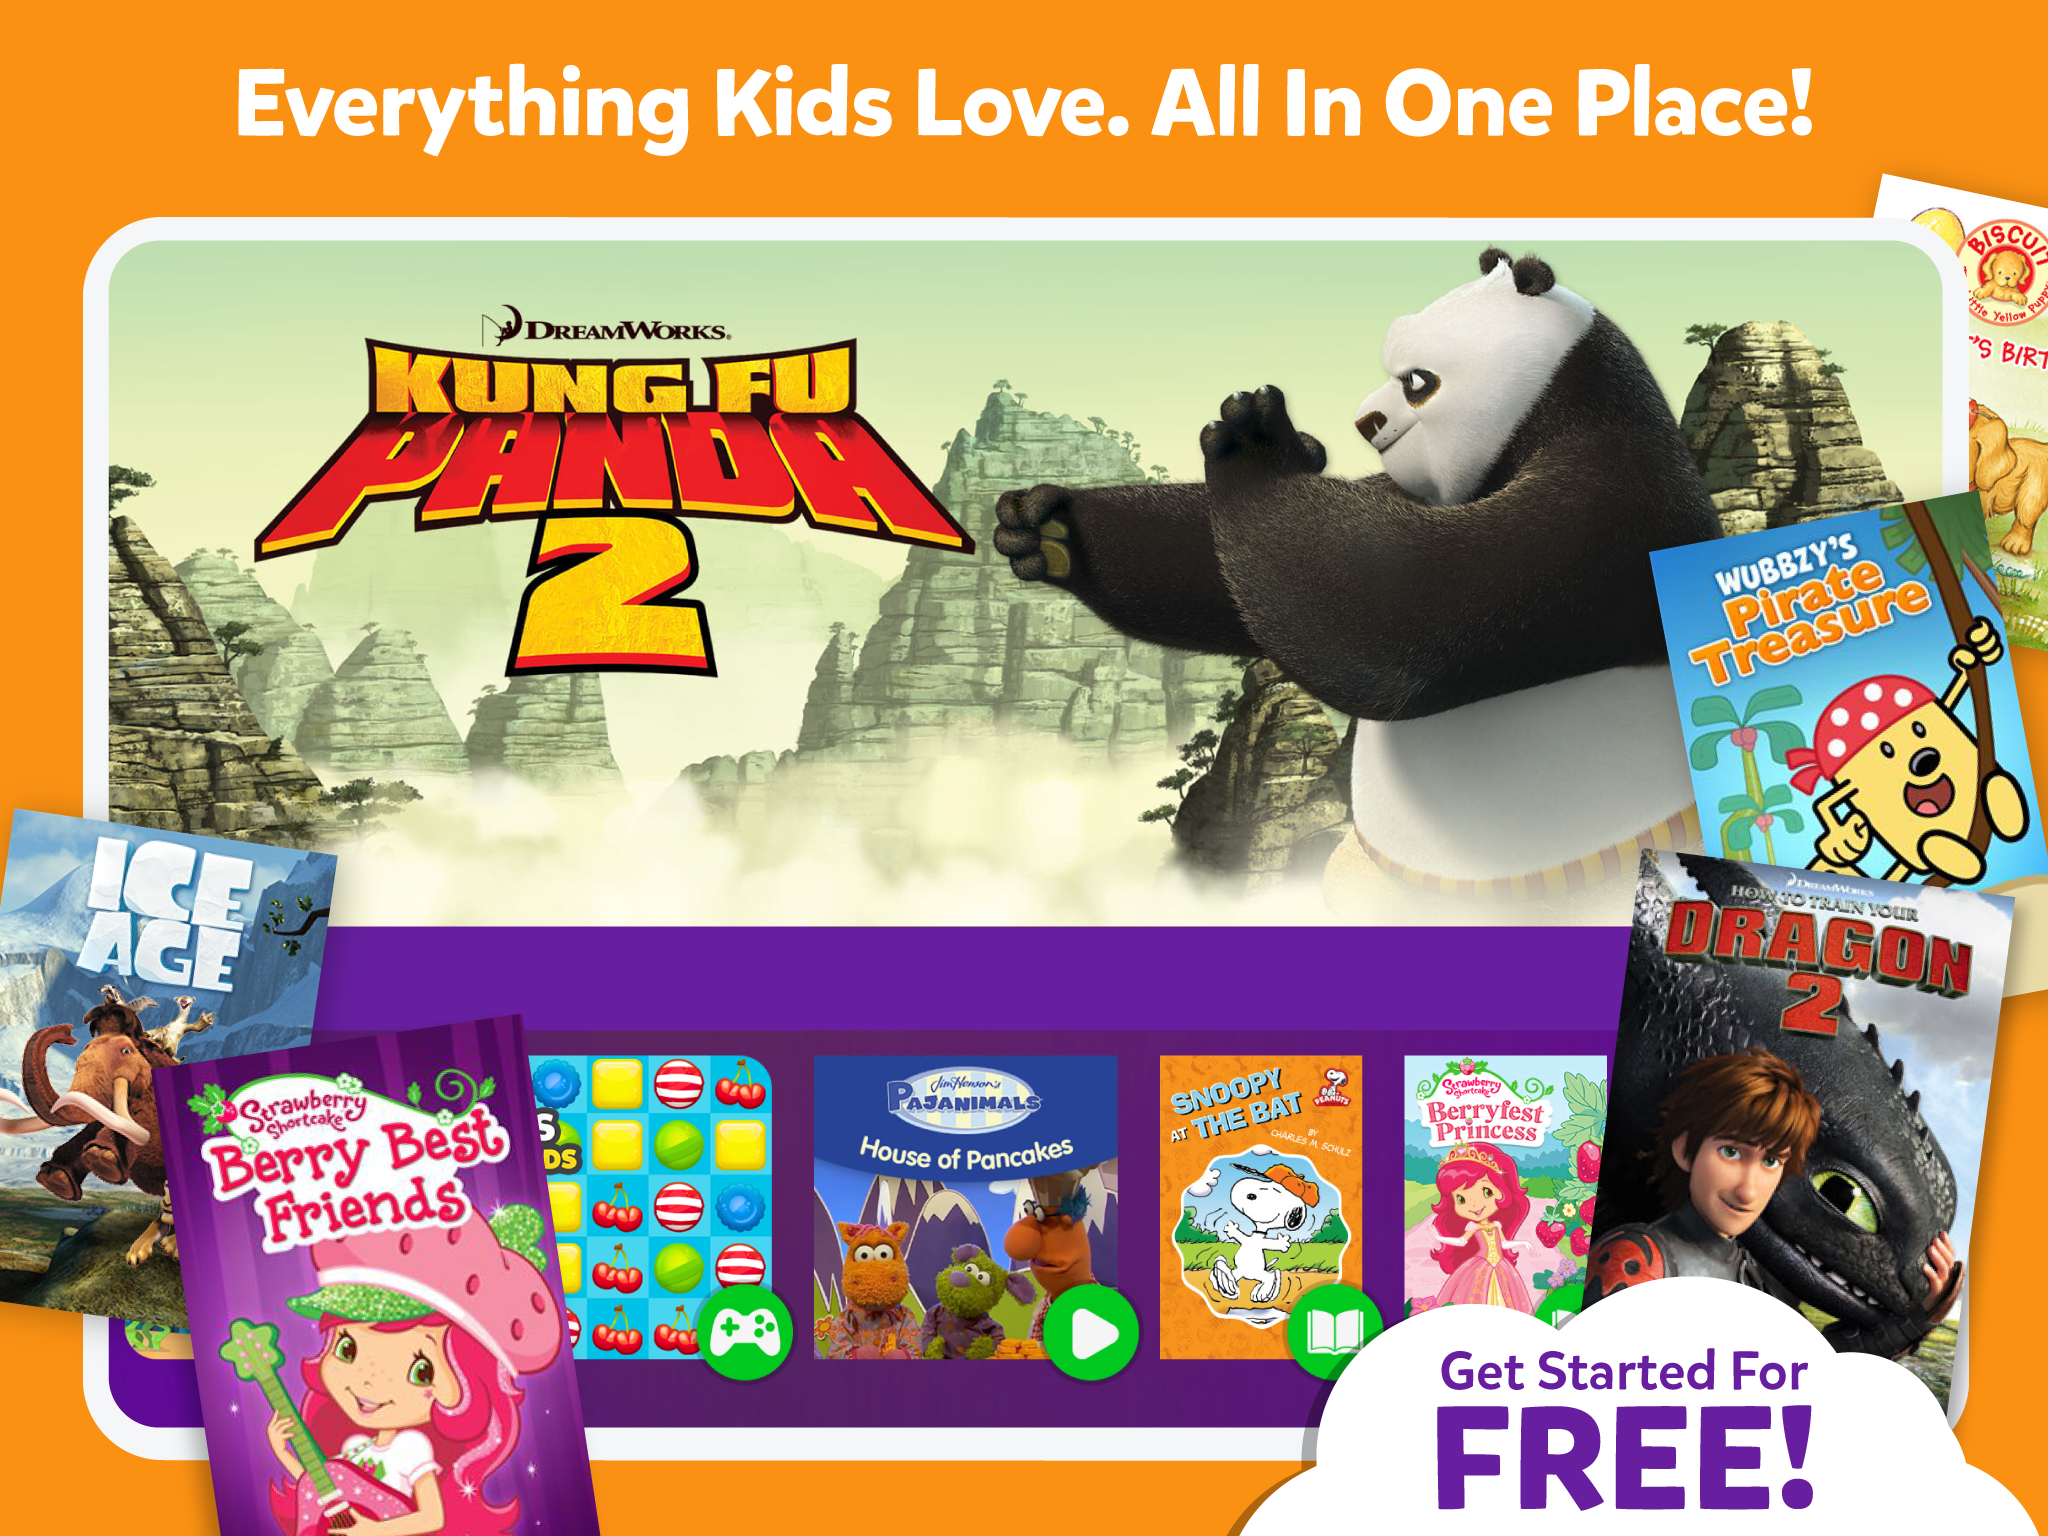 Everything Kids Love. All in One Place!